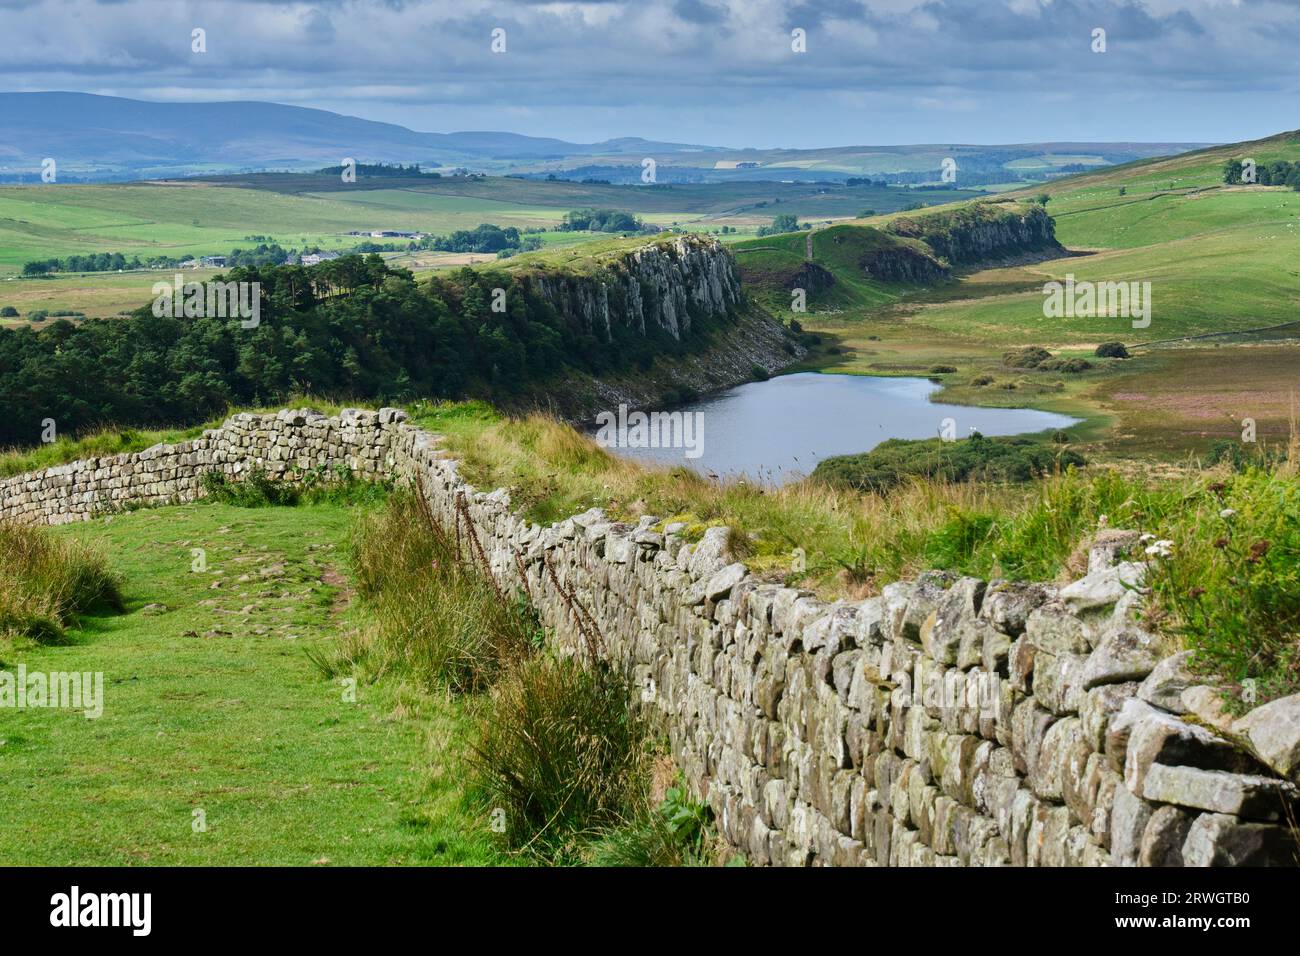 The North Pennines, Crag Lough, and HighShield Crags seen from Hotbank Crags on the Hadrian's Wall National Trail near Bardon Mill, Northumberland Stock Photo